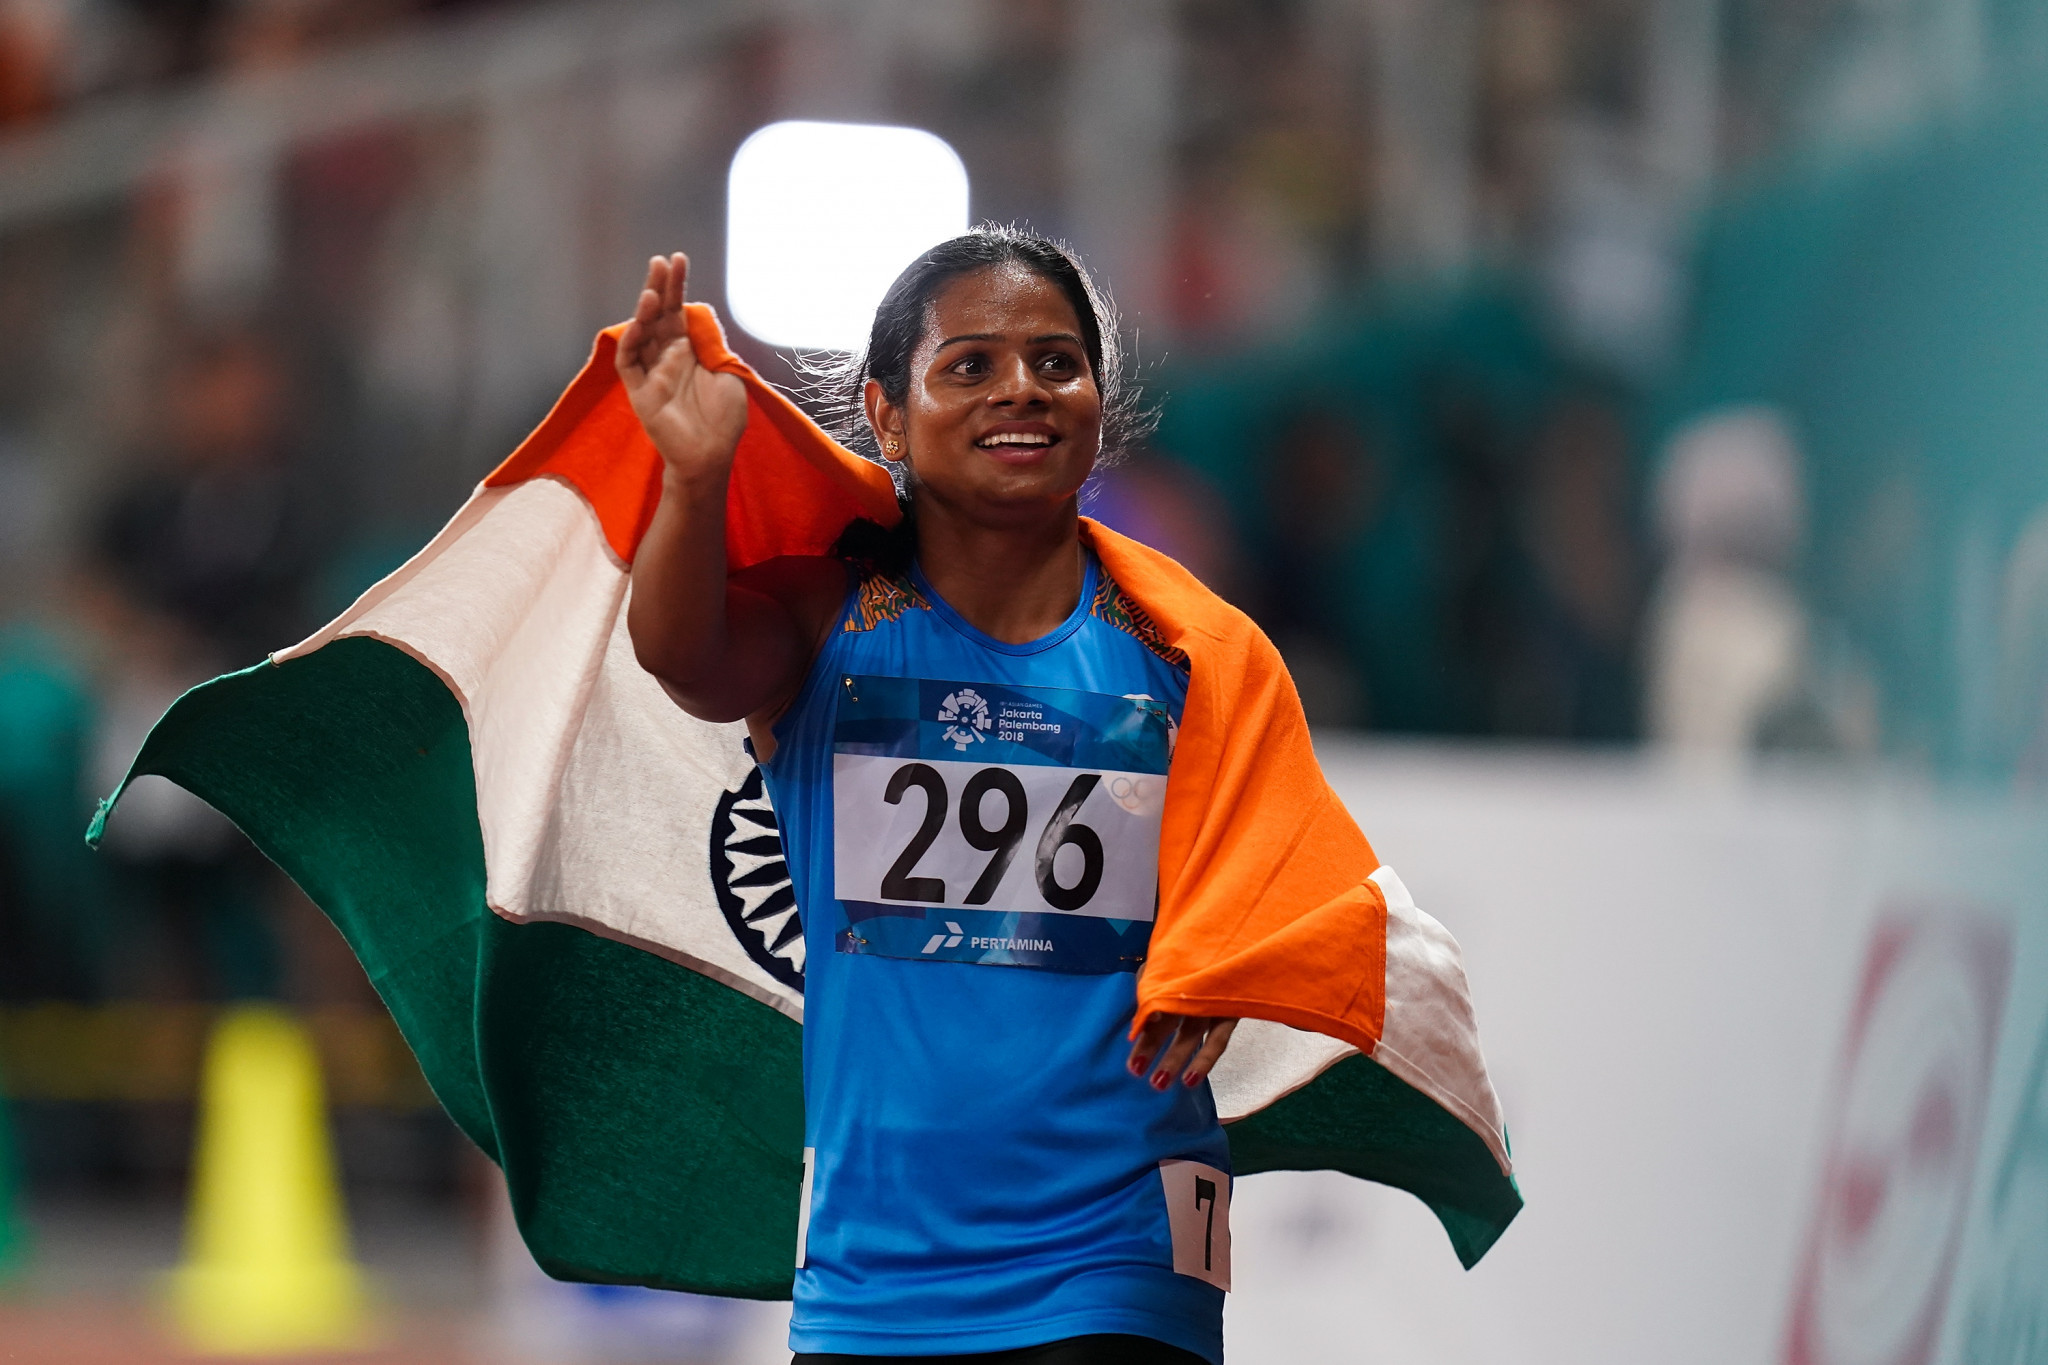 India to miss World Athletics Relays over travel restrictions following COVID-19 surge